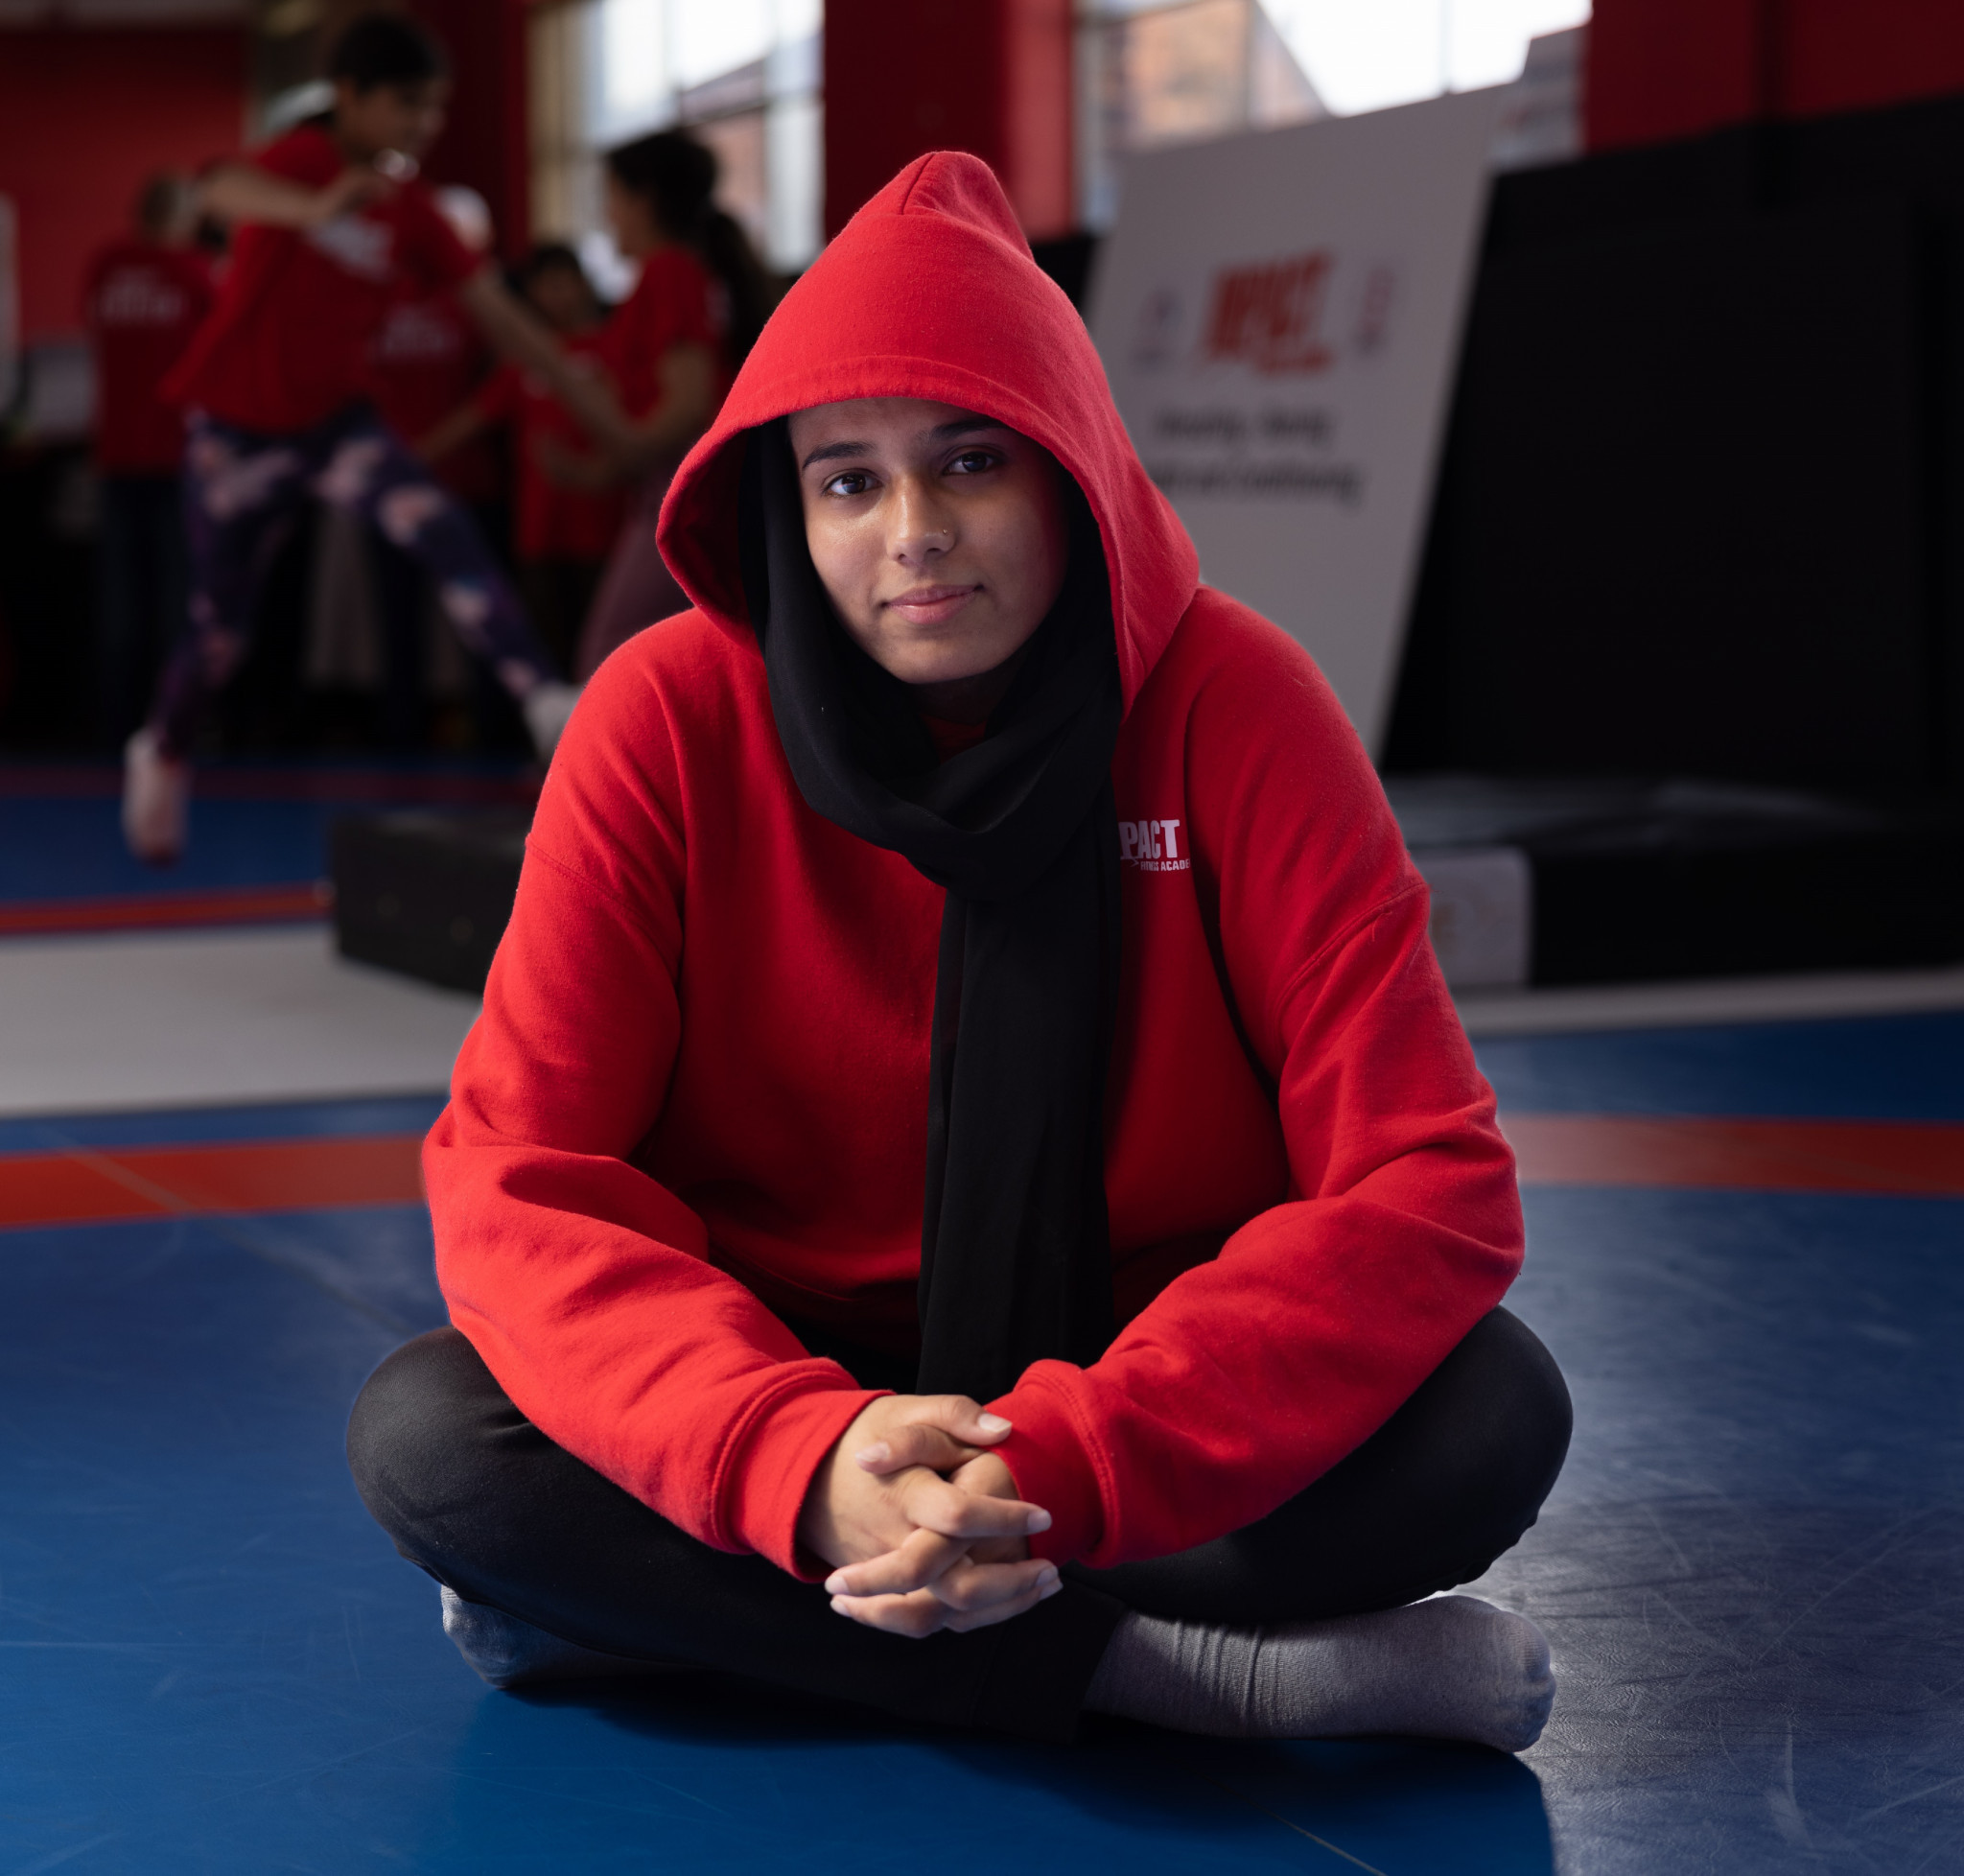 Haniyah Kousar is operating as Britain's first female Muslim wresting coach at Impact Fitness Academy in Tyseley, where today's new sports initiative was launched ©WMCA